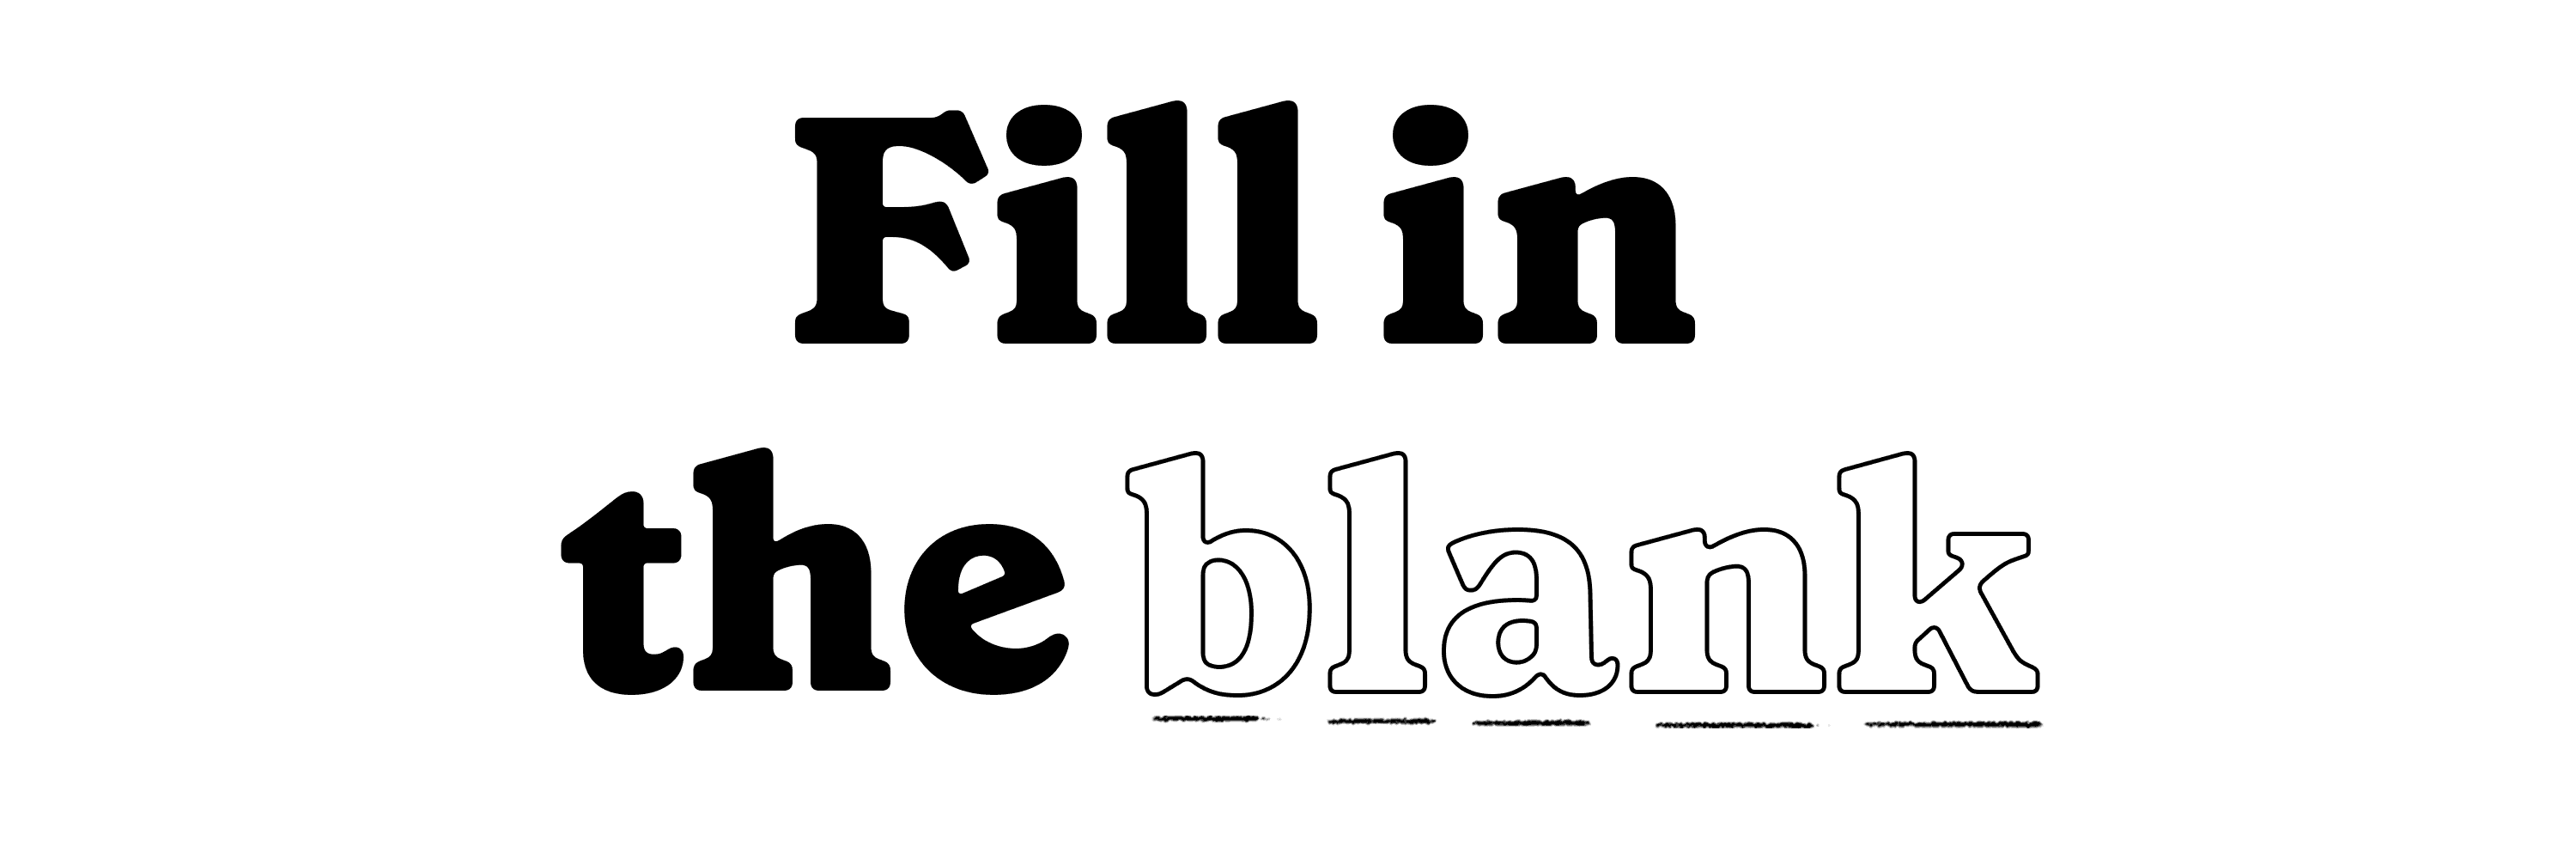 An illustration of the words "Fill in the blank"